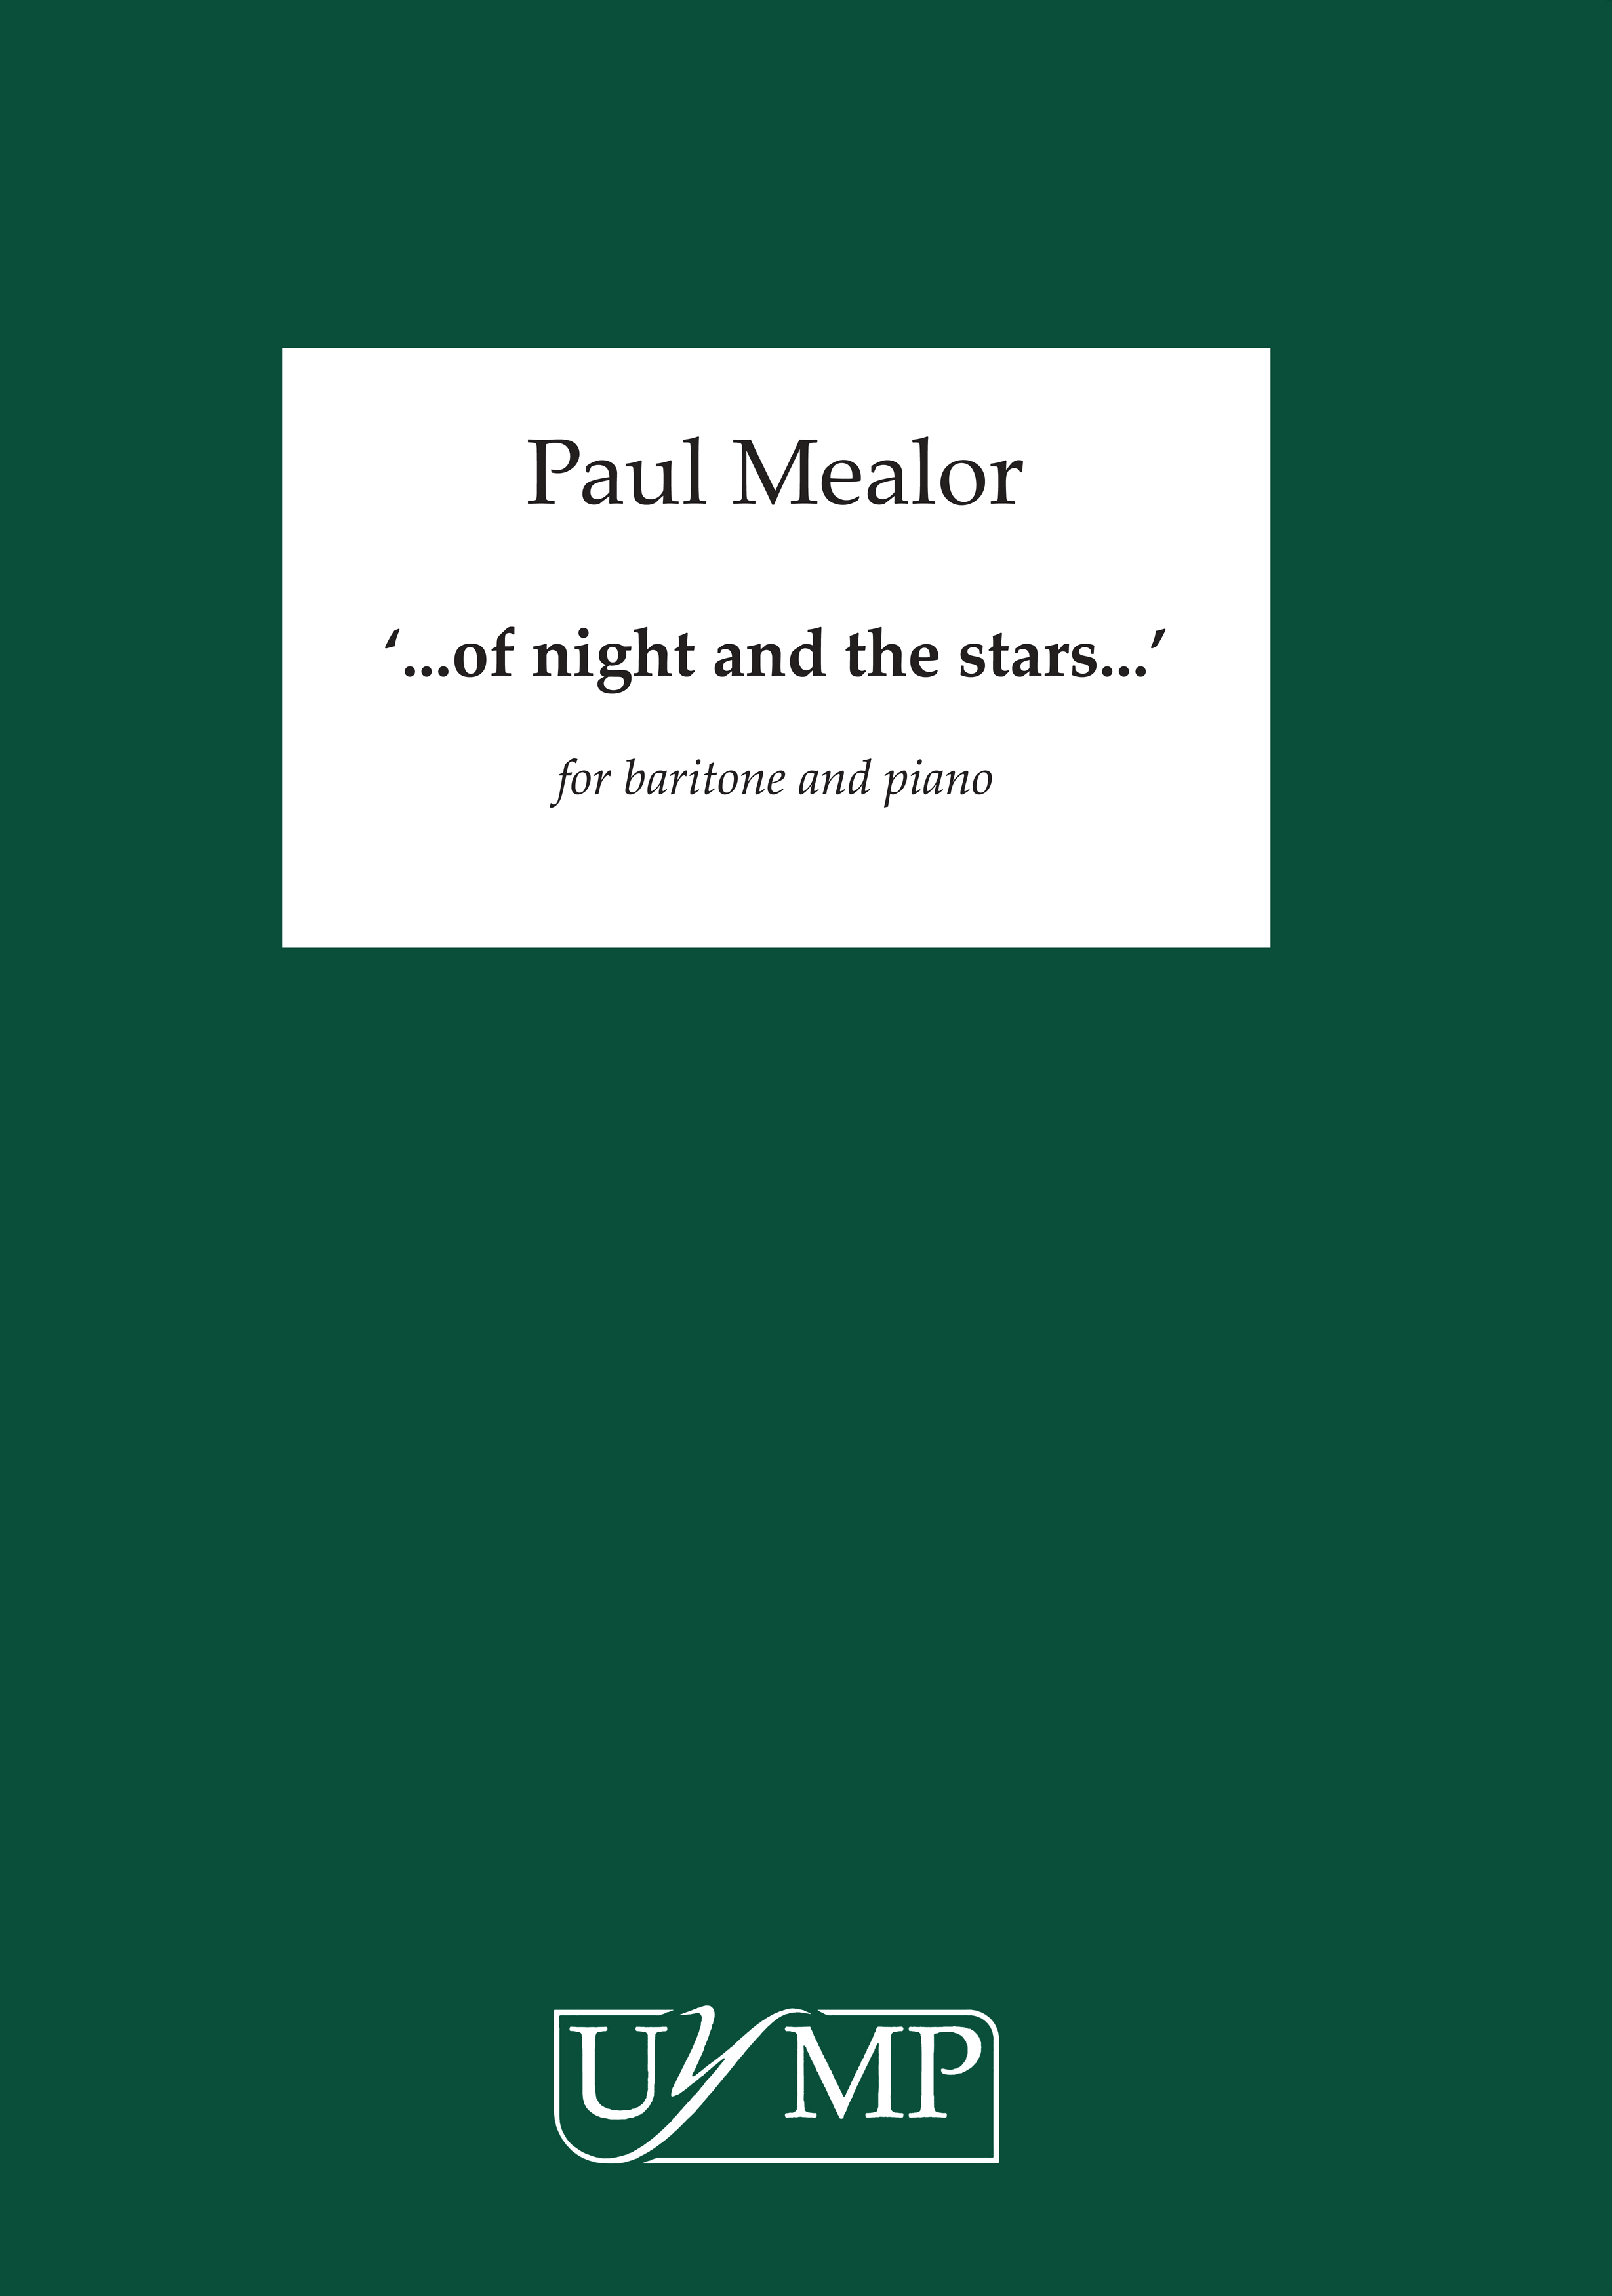 Paul Mealor: ...of night and the stars...: Baritone Voice: Vocal Work